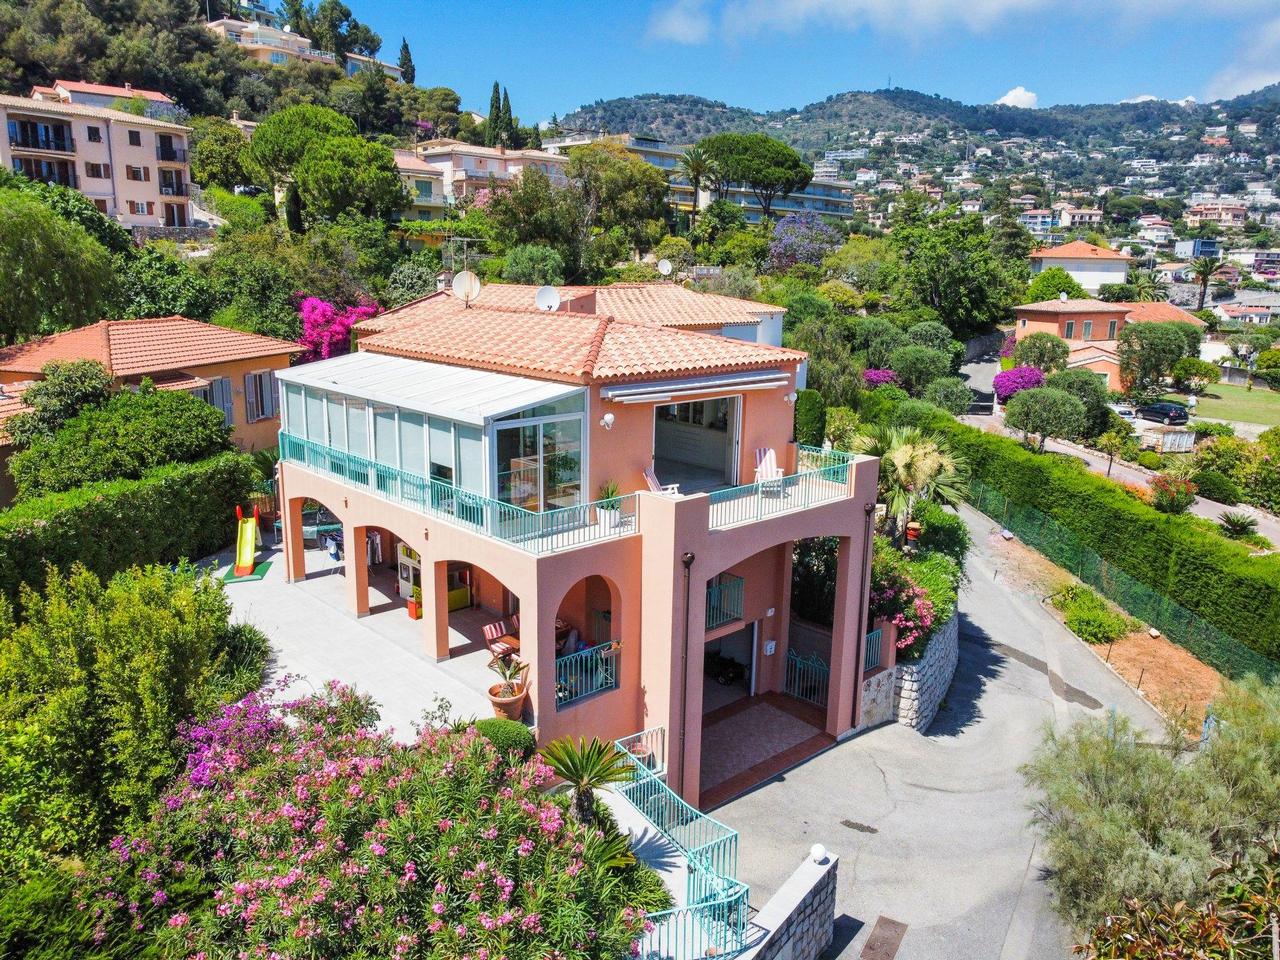 Nice Riviera - Agence Immobiliére Nice Côte d'Azur|House 5 Rooms 150m2 for sale 1,680,000 €